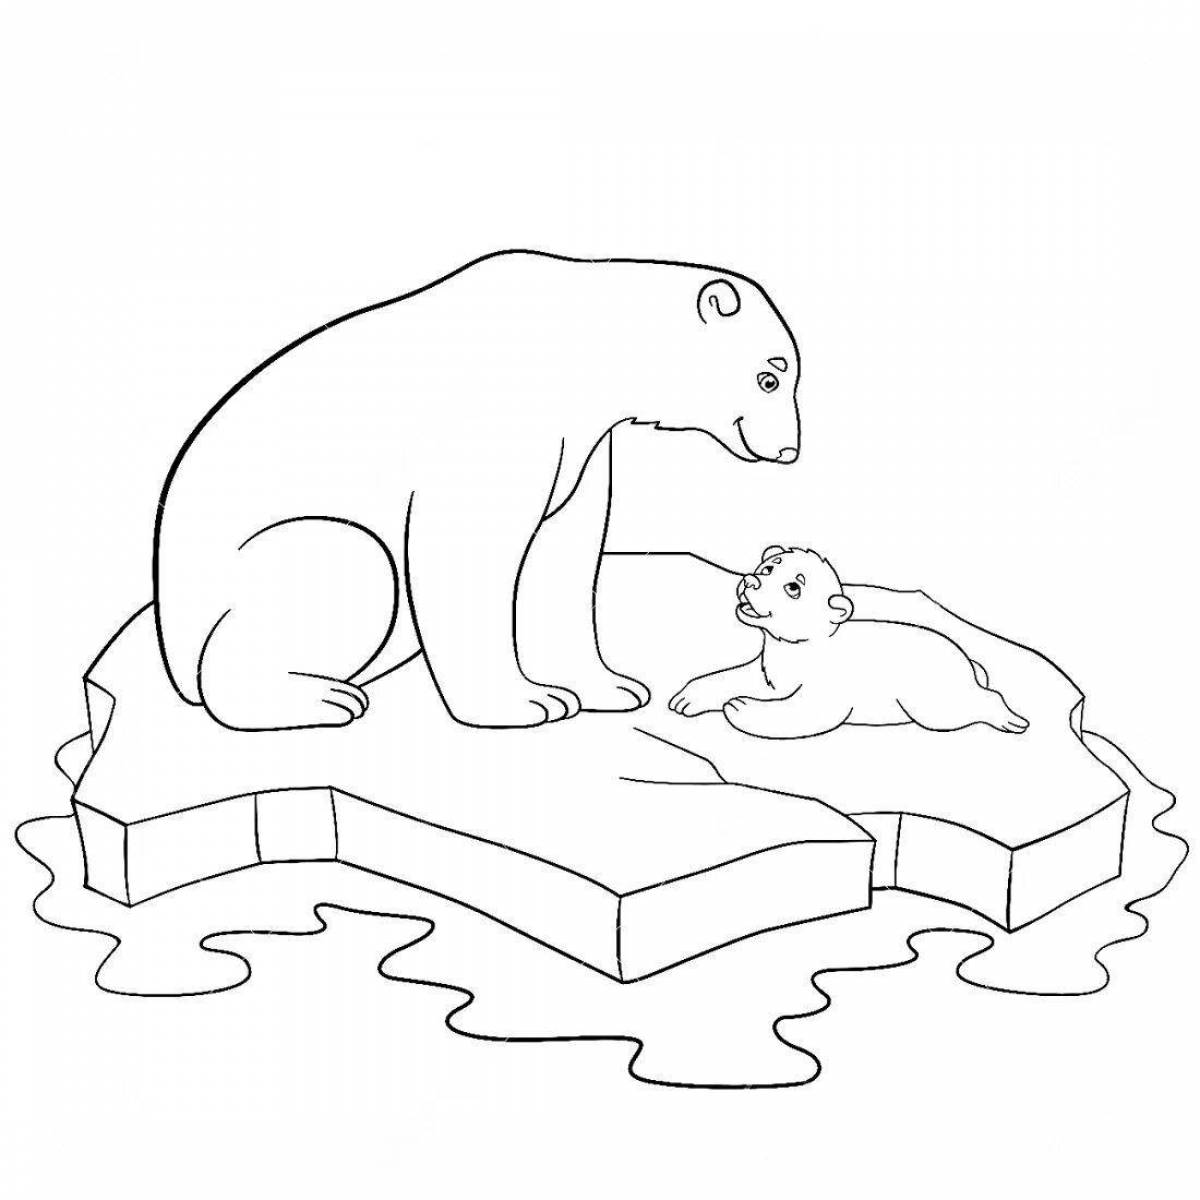 Coloring book of a smiling polar bear with a cub